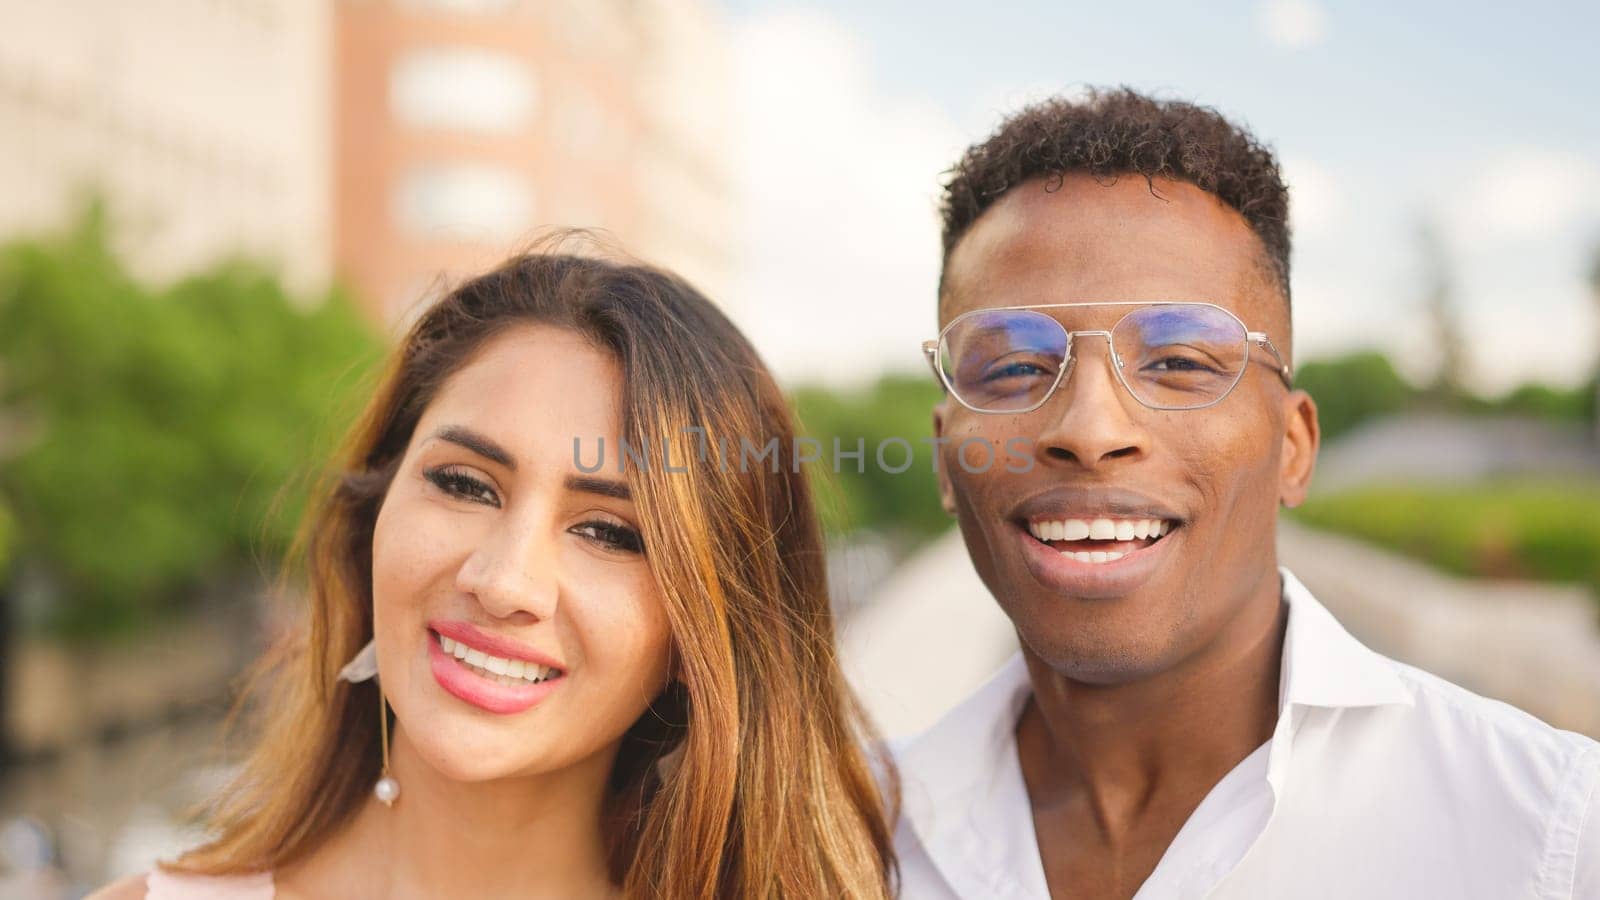 Multiethnic couple of a latina woman and a african man looking at the camera and smiling outdoors